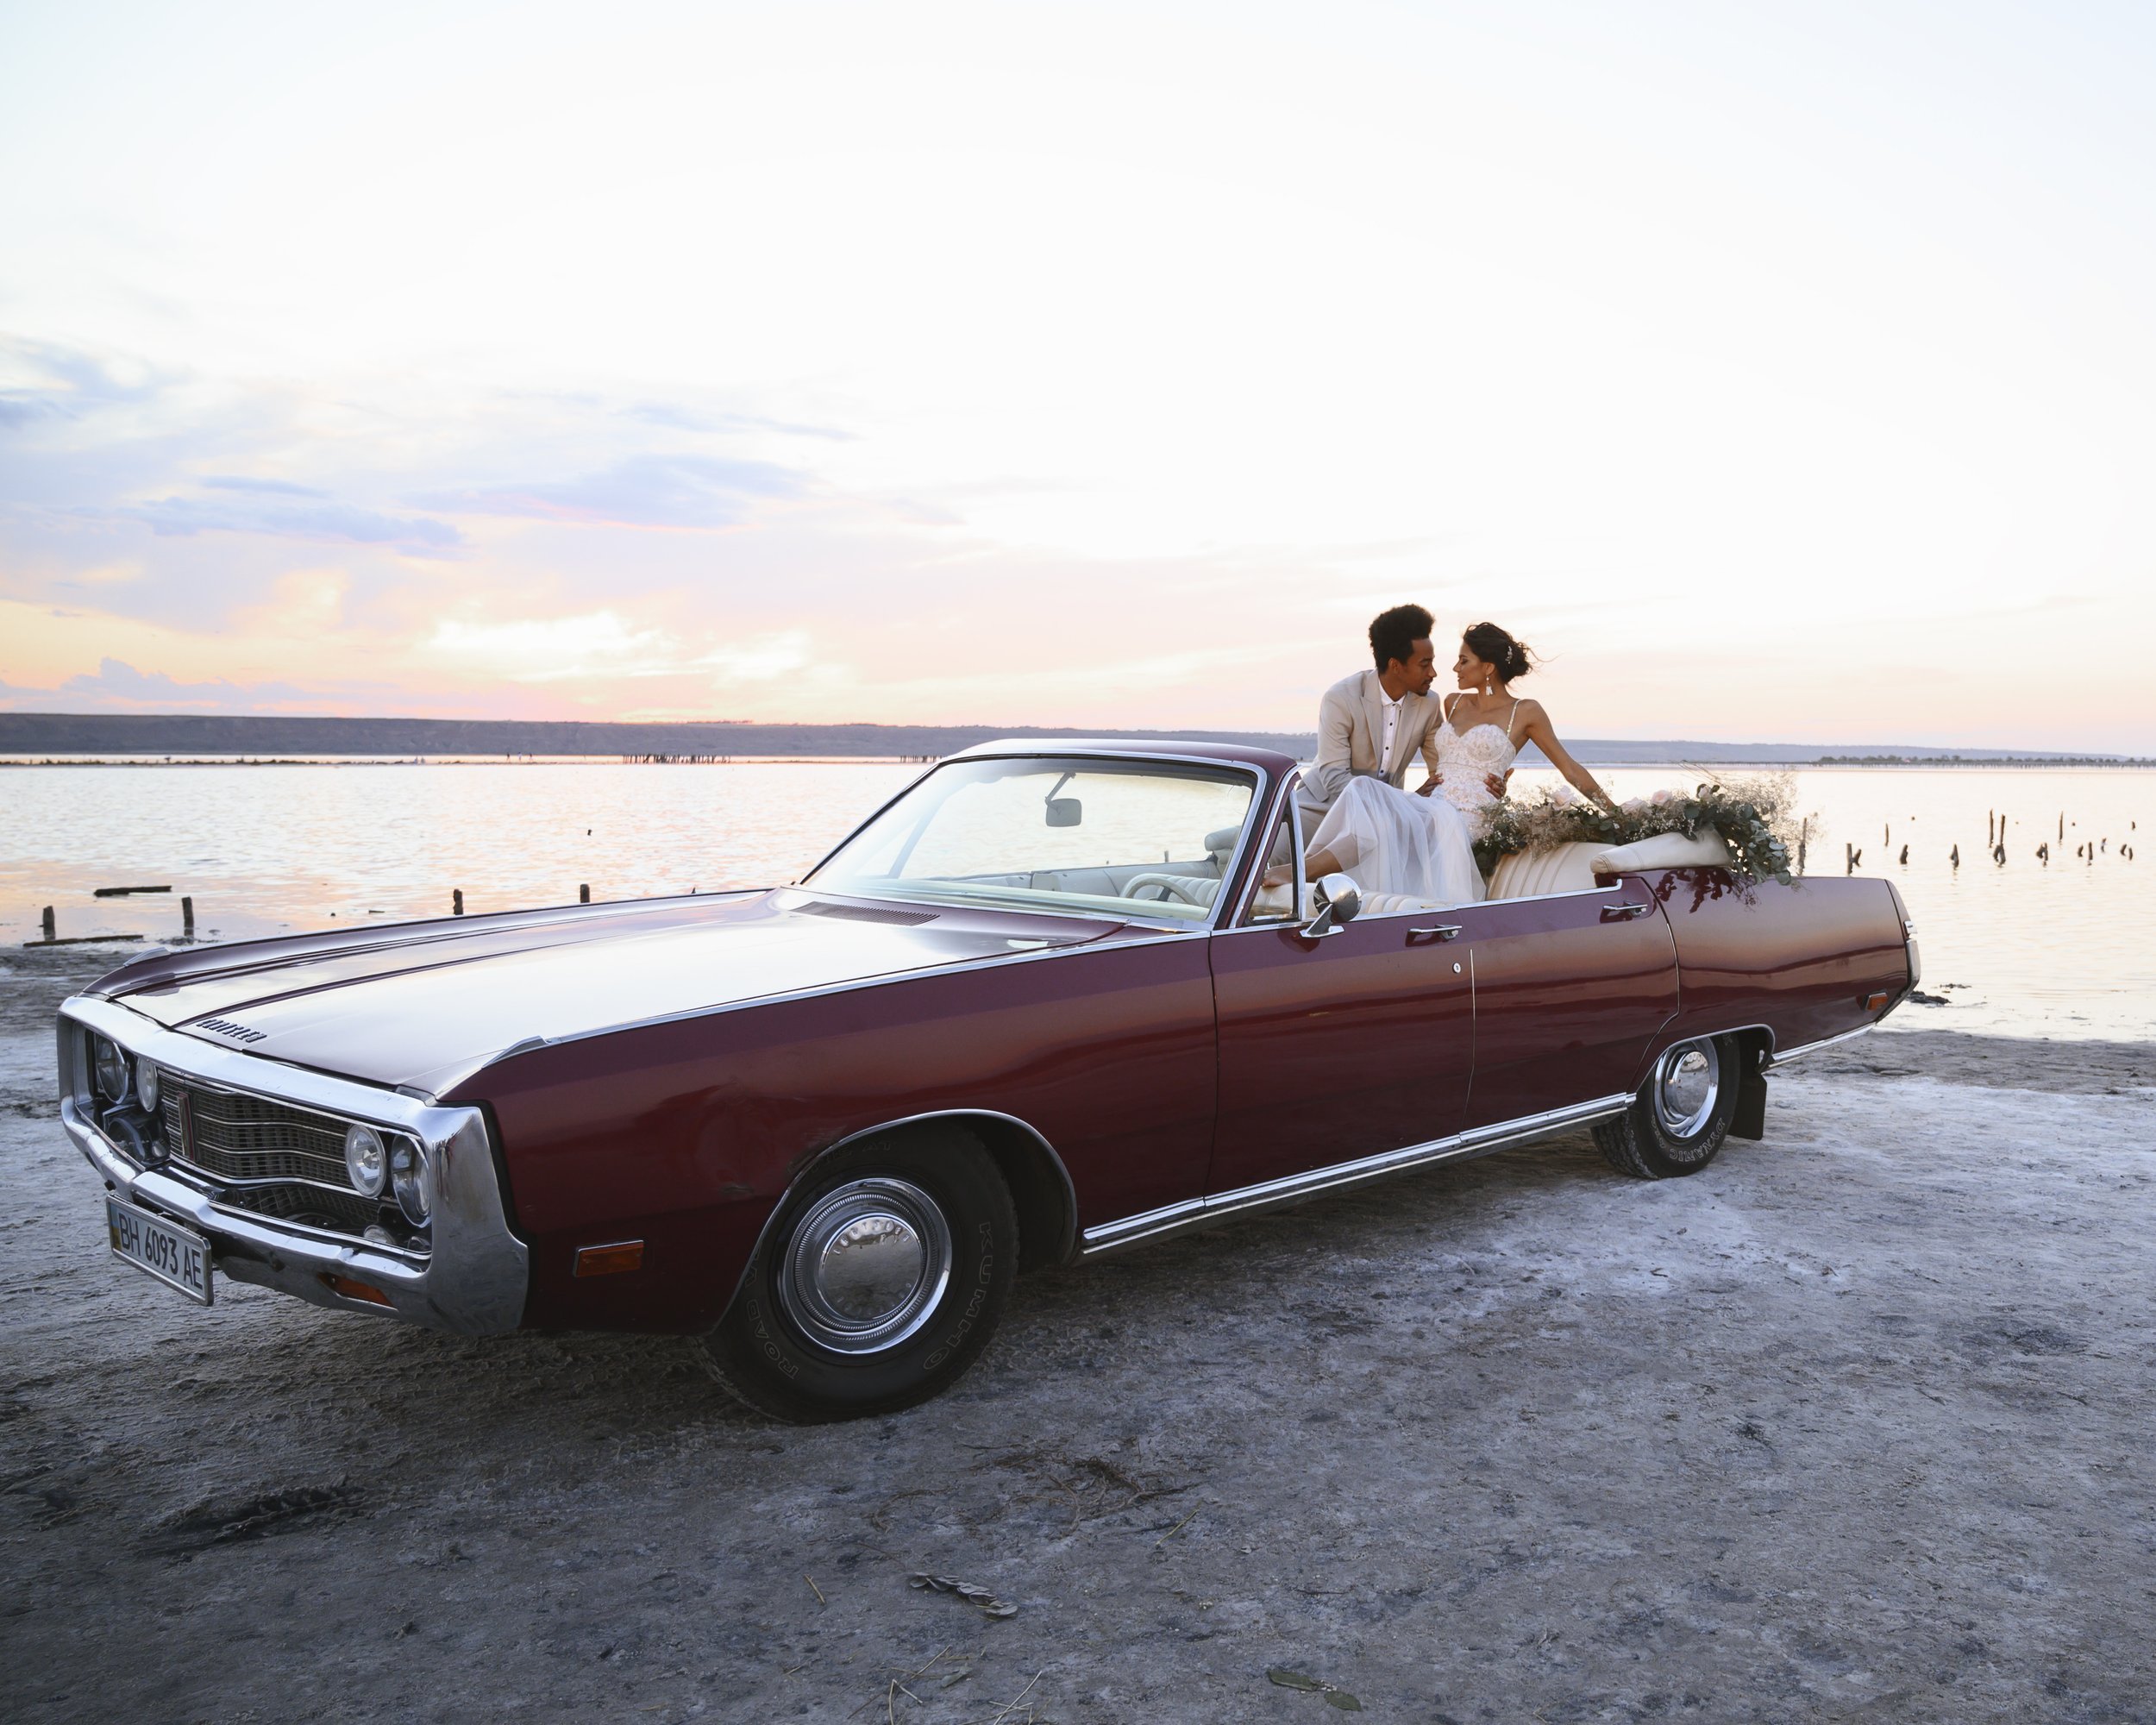  A red convertible car with cream leather interior is parked on a beach. With the sea and sunset behind them the bride and groom are sat on the top of the back seats with their feet resting on the backs of the front seats and are looking into each ot